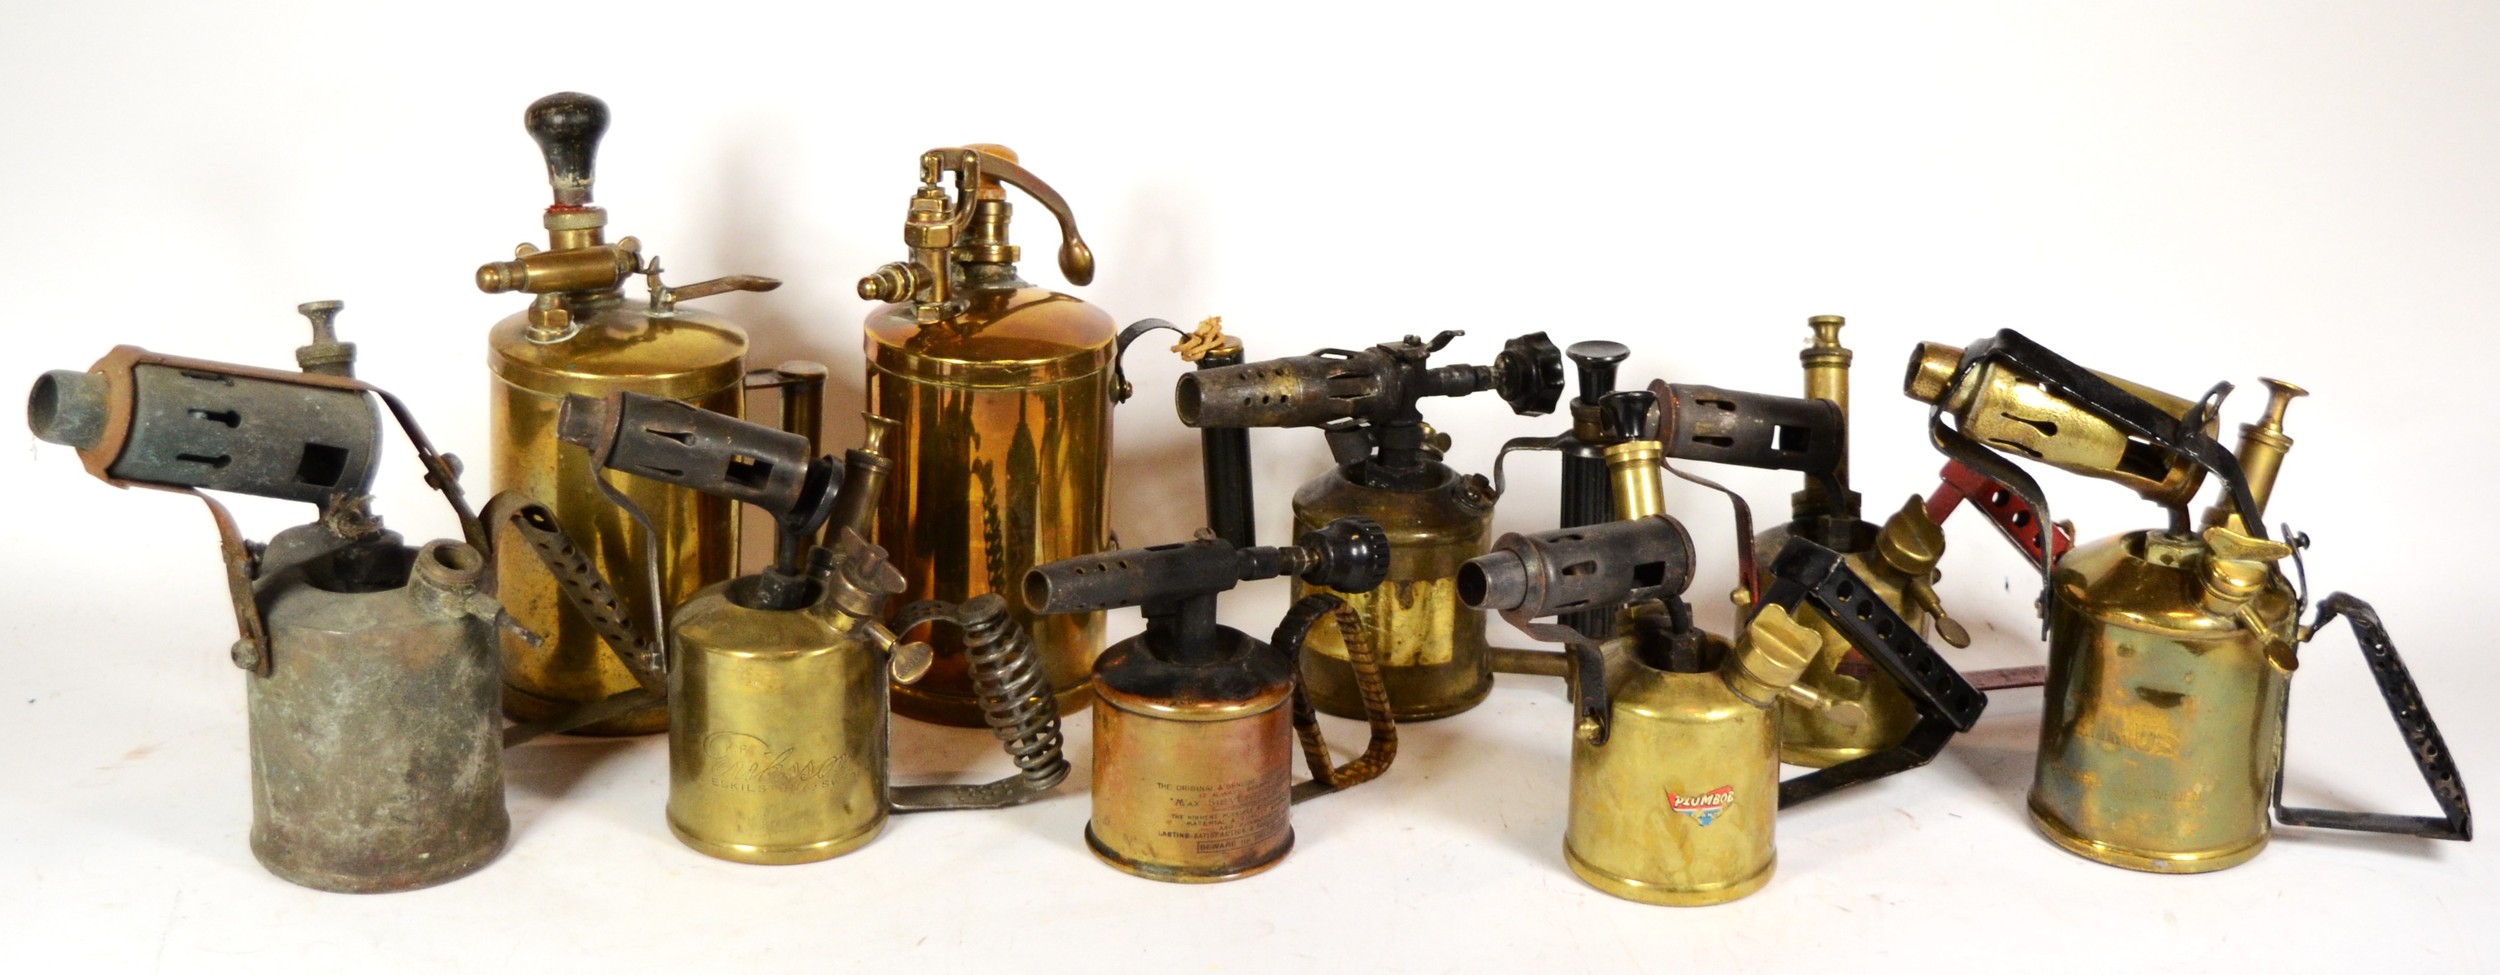 A collection of early 20th century brass blow torches.